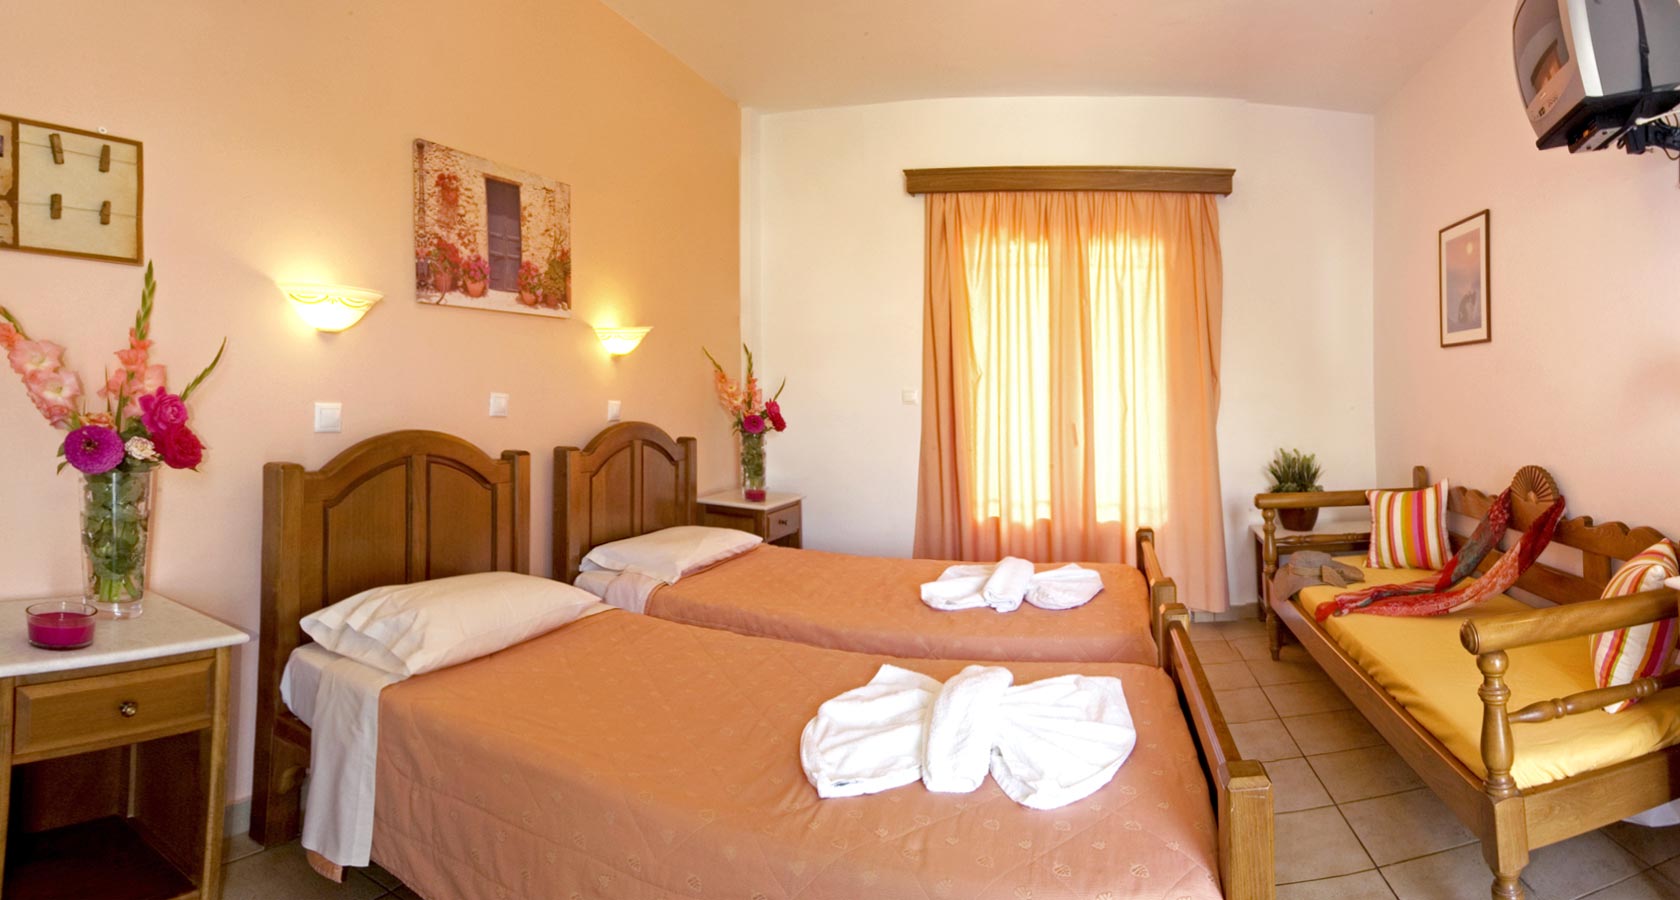 Room of Hermes Hotel in island Greece - Ios Accommodation